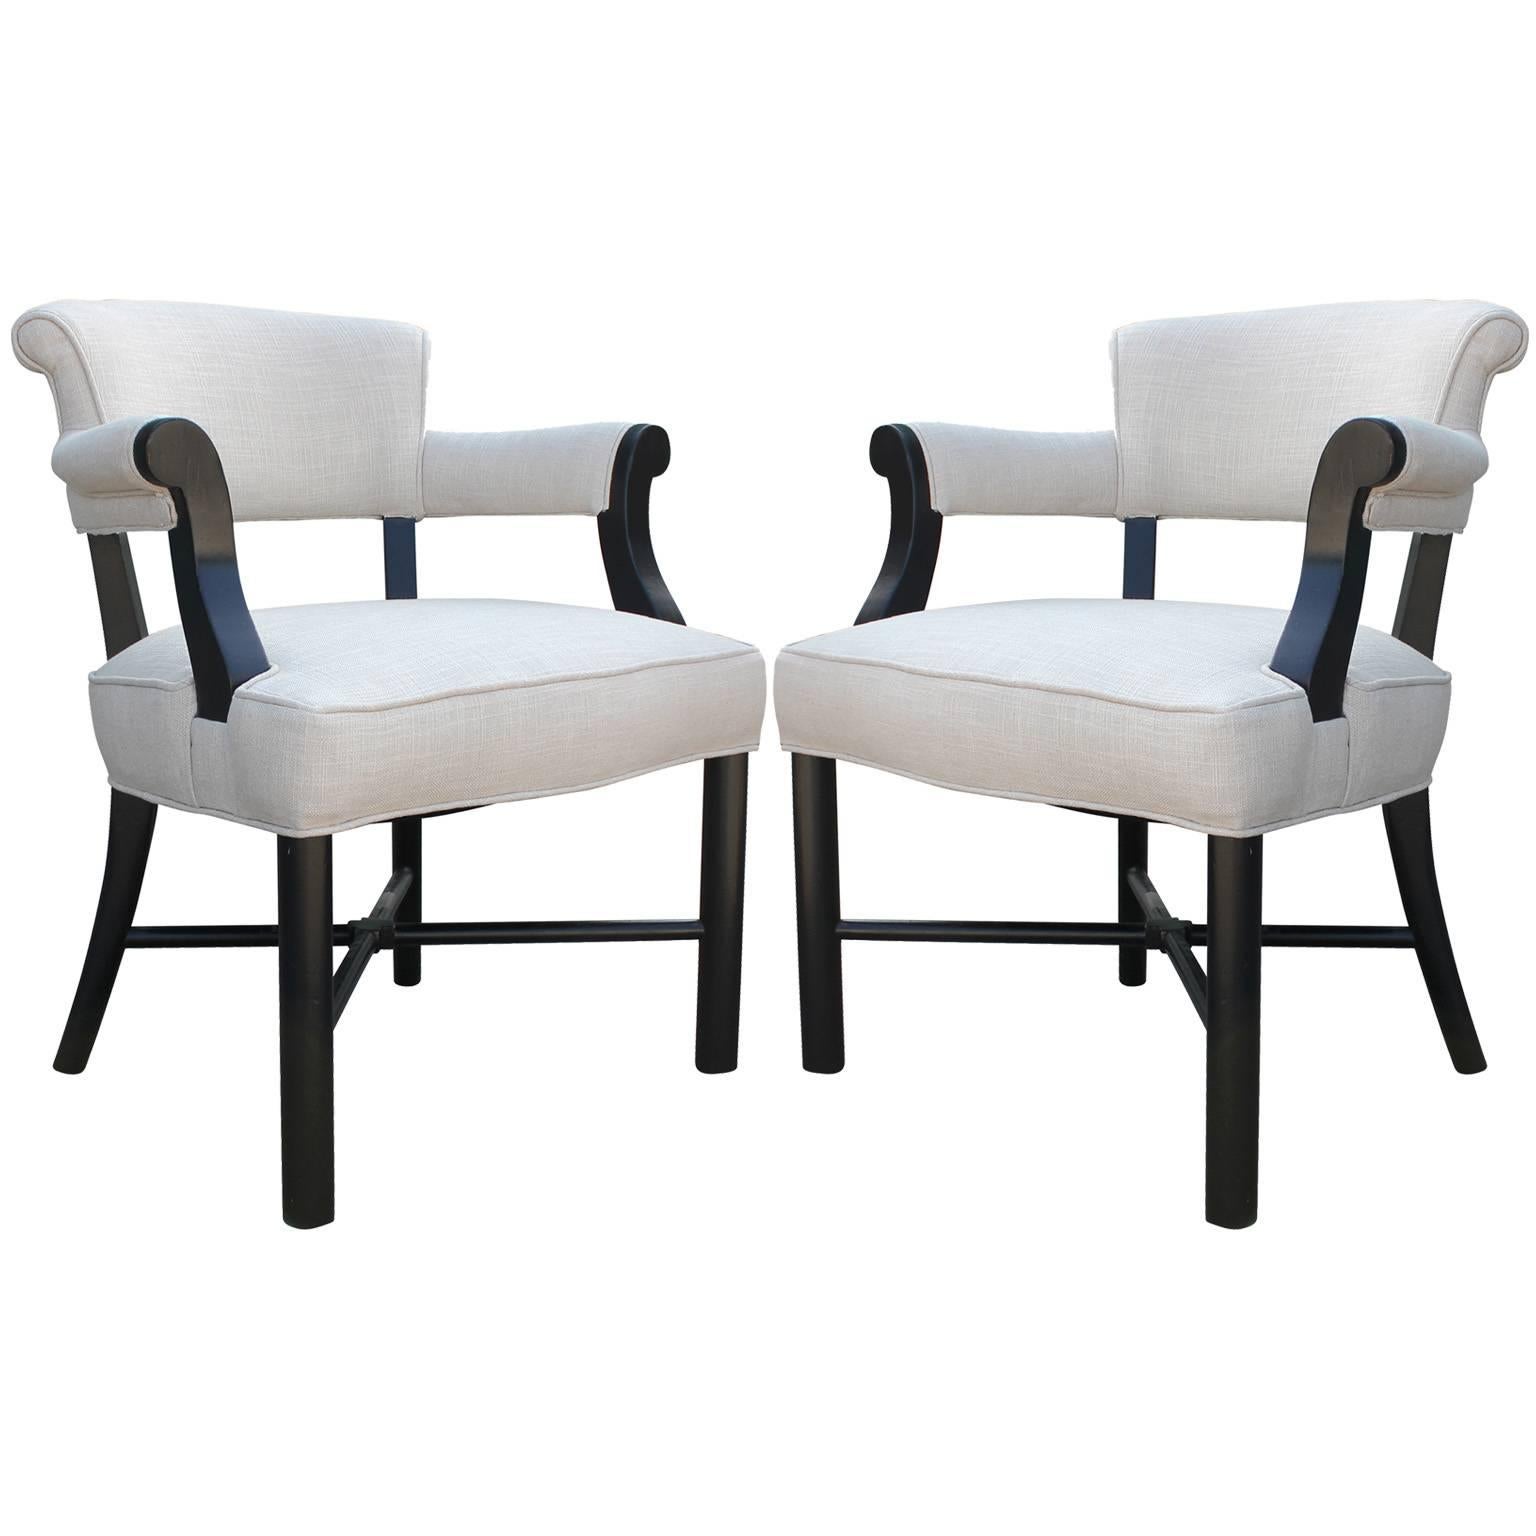 Mid-20th Century Set of Six Armchairs Attributed to Harvey Probber in White Lee Joffa Fabric